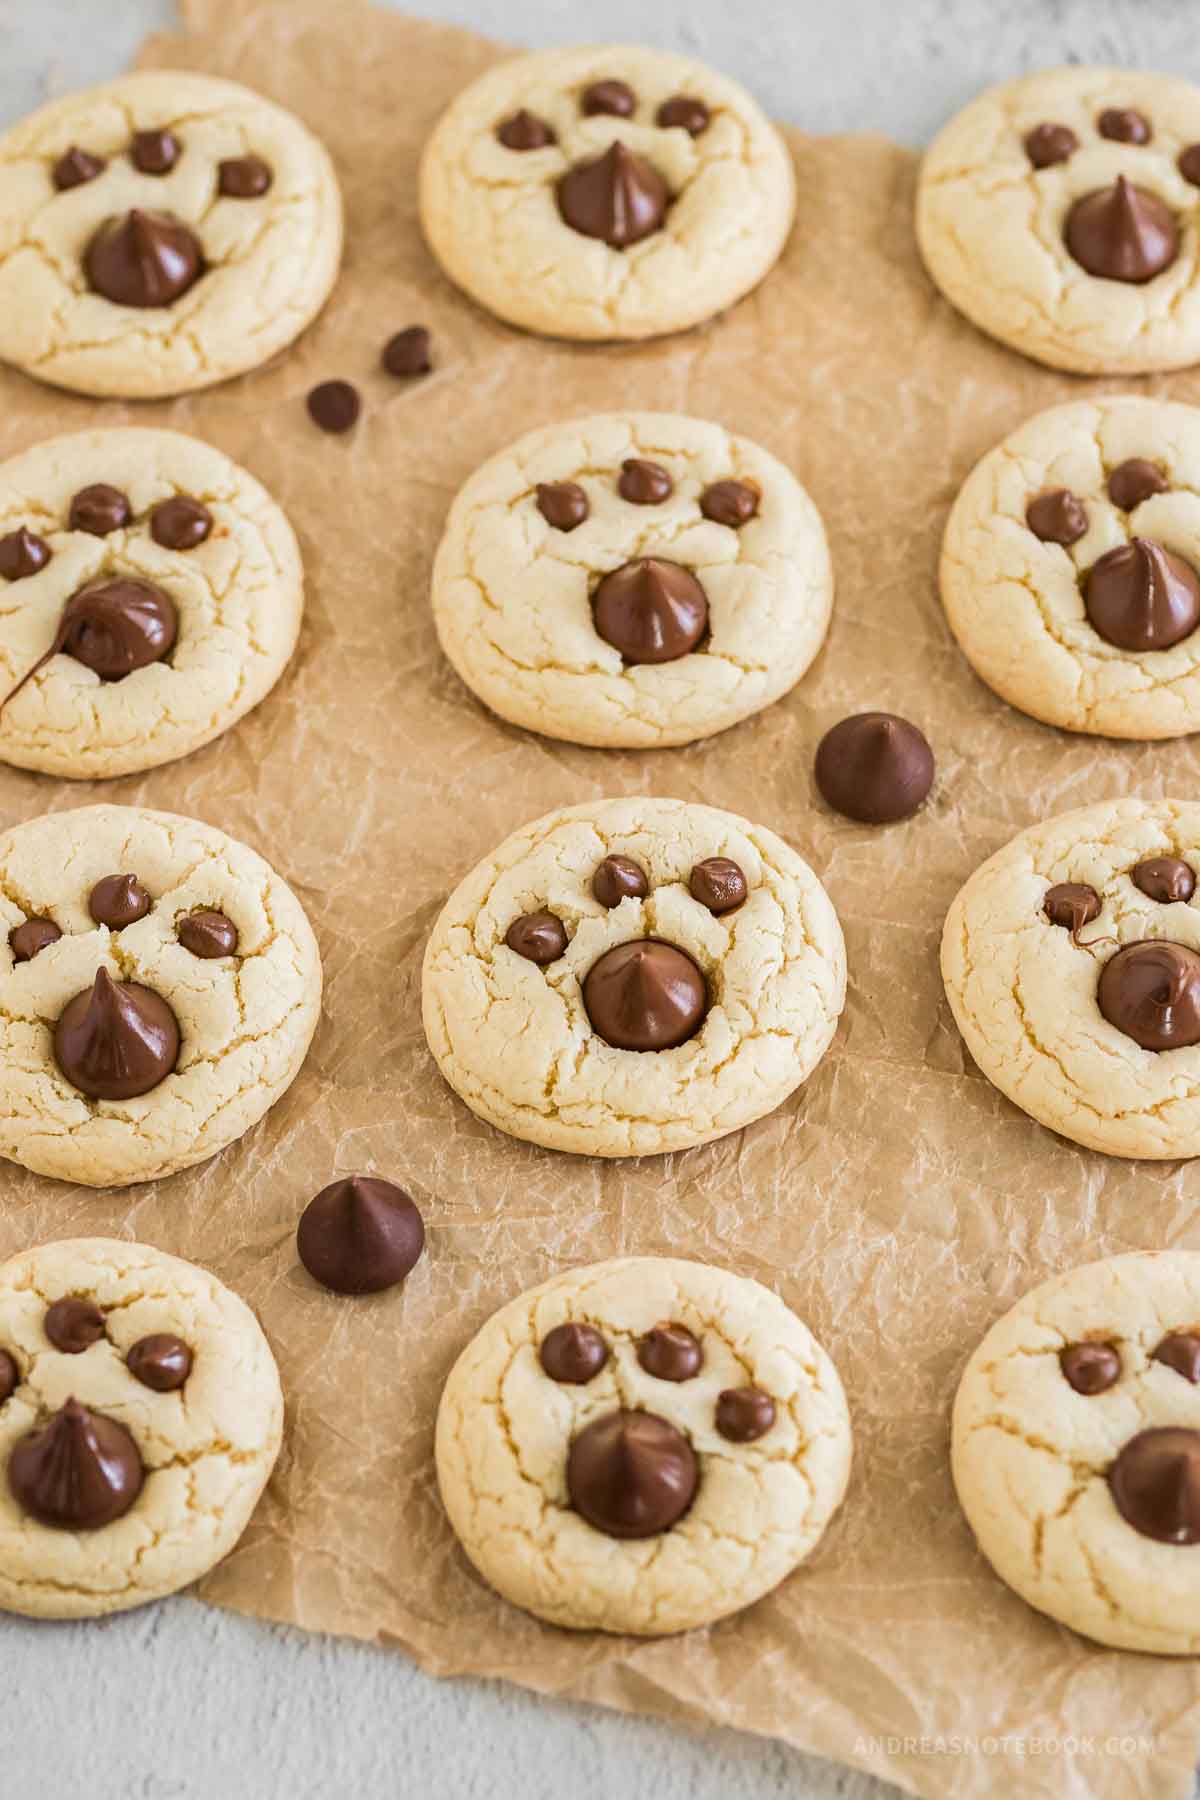 12 cooked cookies that look like bear paw cookies on parchment paper.